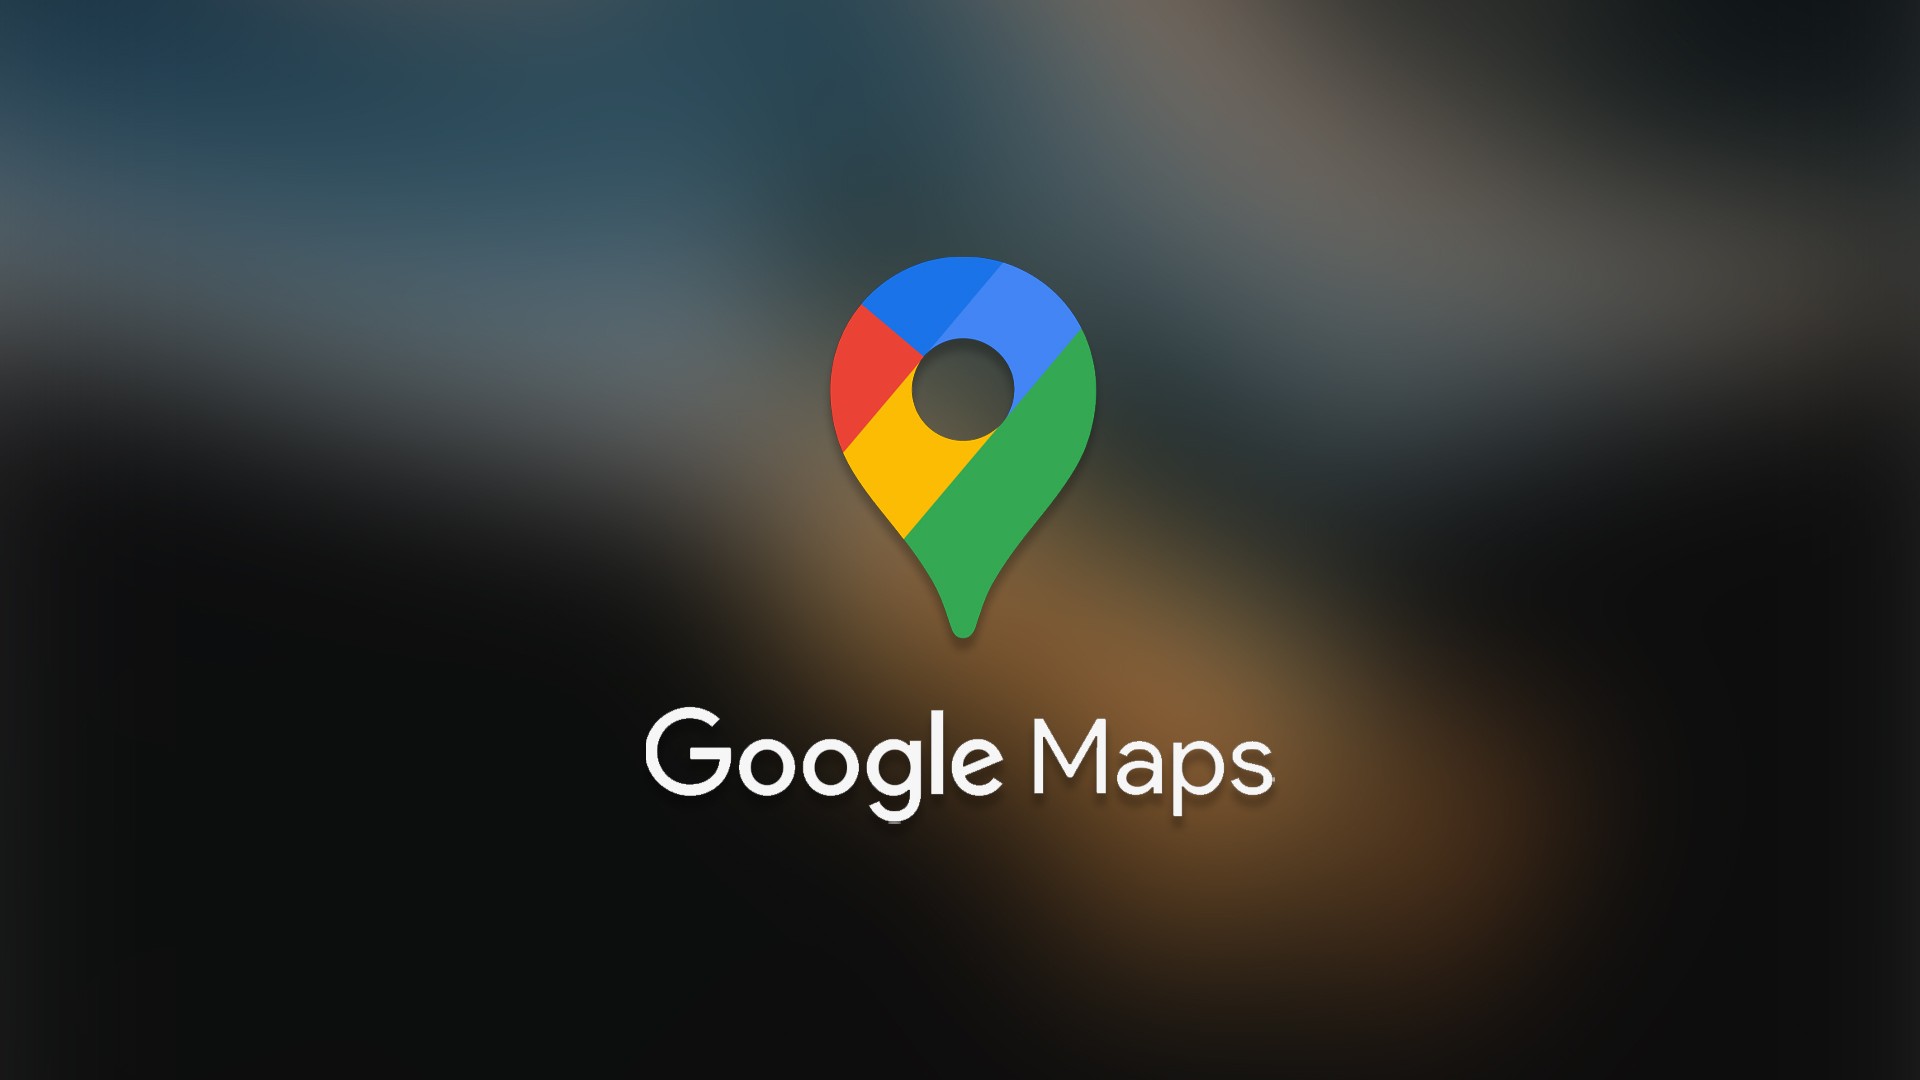 End of the road: Google Maps is no longer supported on Wear OS 2 watches
